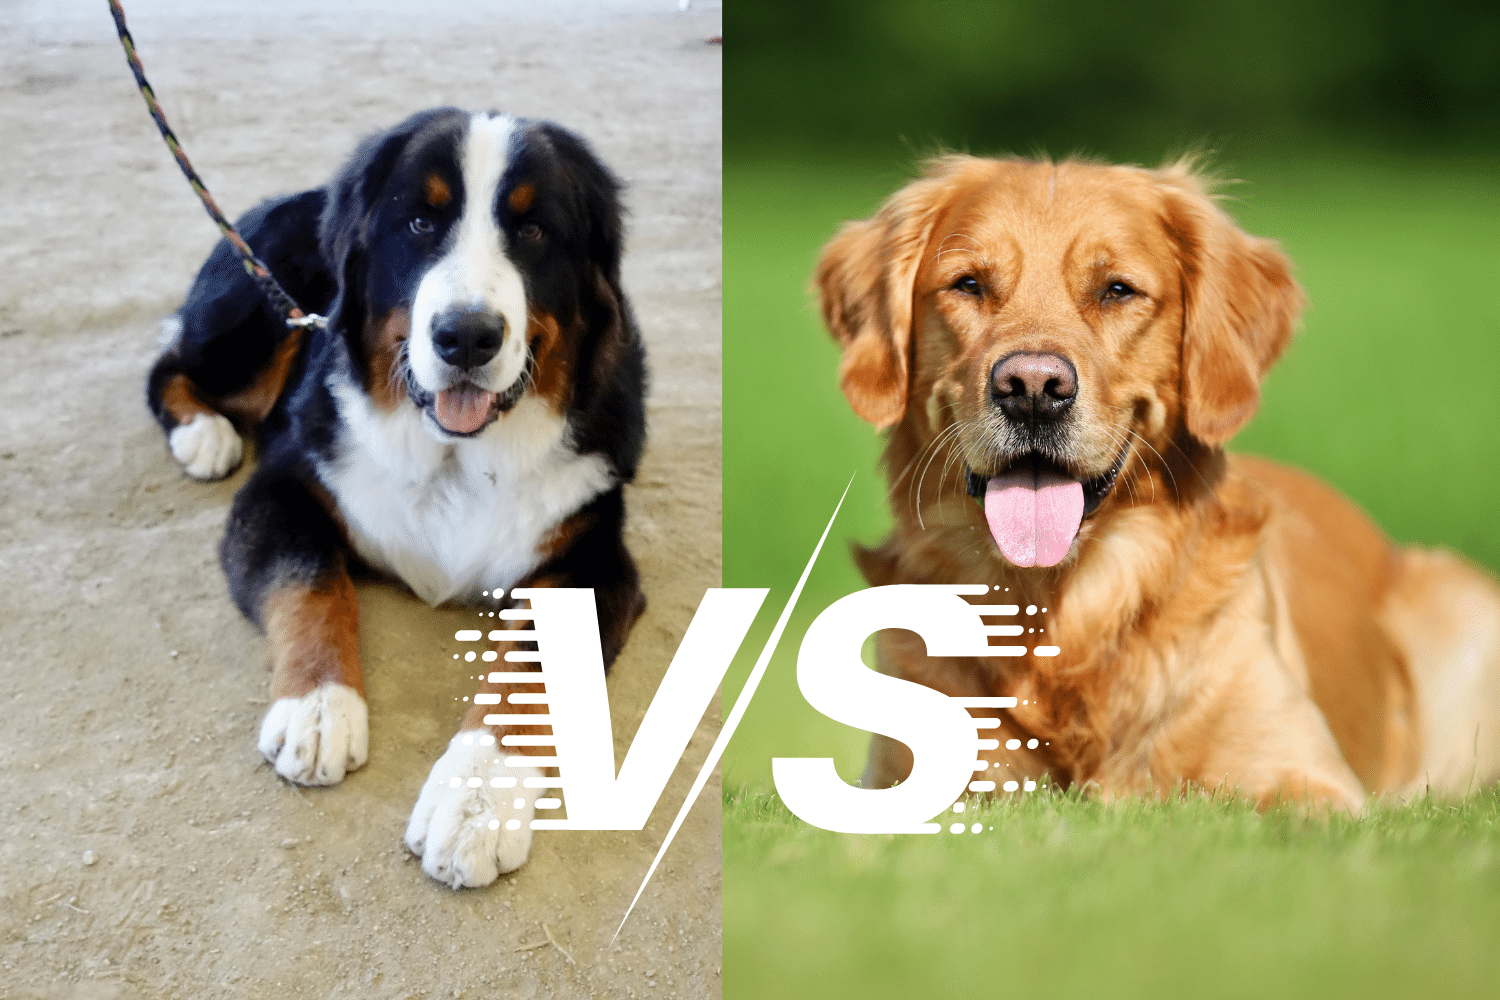 Do you need info about Bernese Mountain Dog vs Golden Retriever? We’ve compiled this article to help you best. Since you have come here to learn more about the differences between Bernese Mountain Dog and Golden Retriever's characteristics, features, hobbies and eating habits.